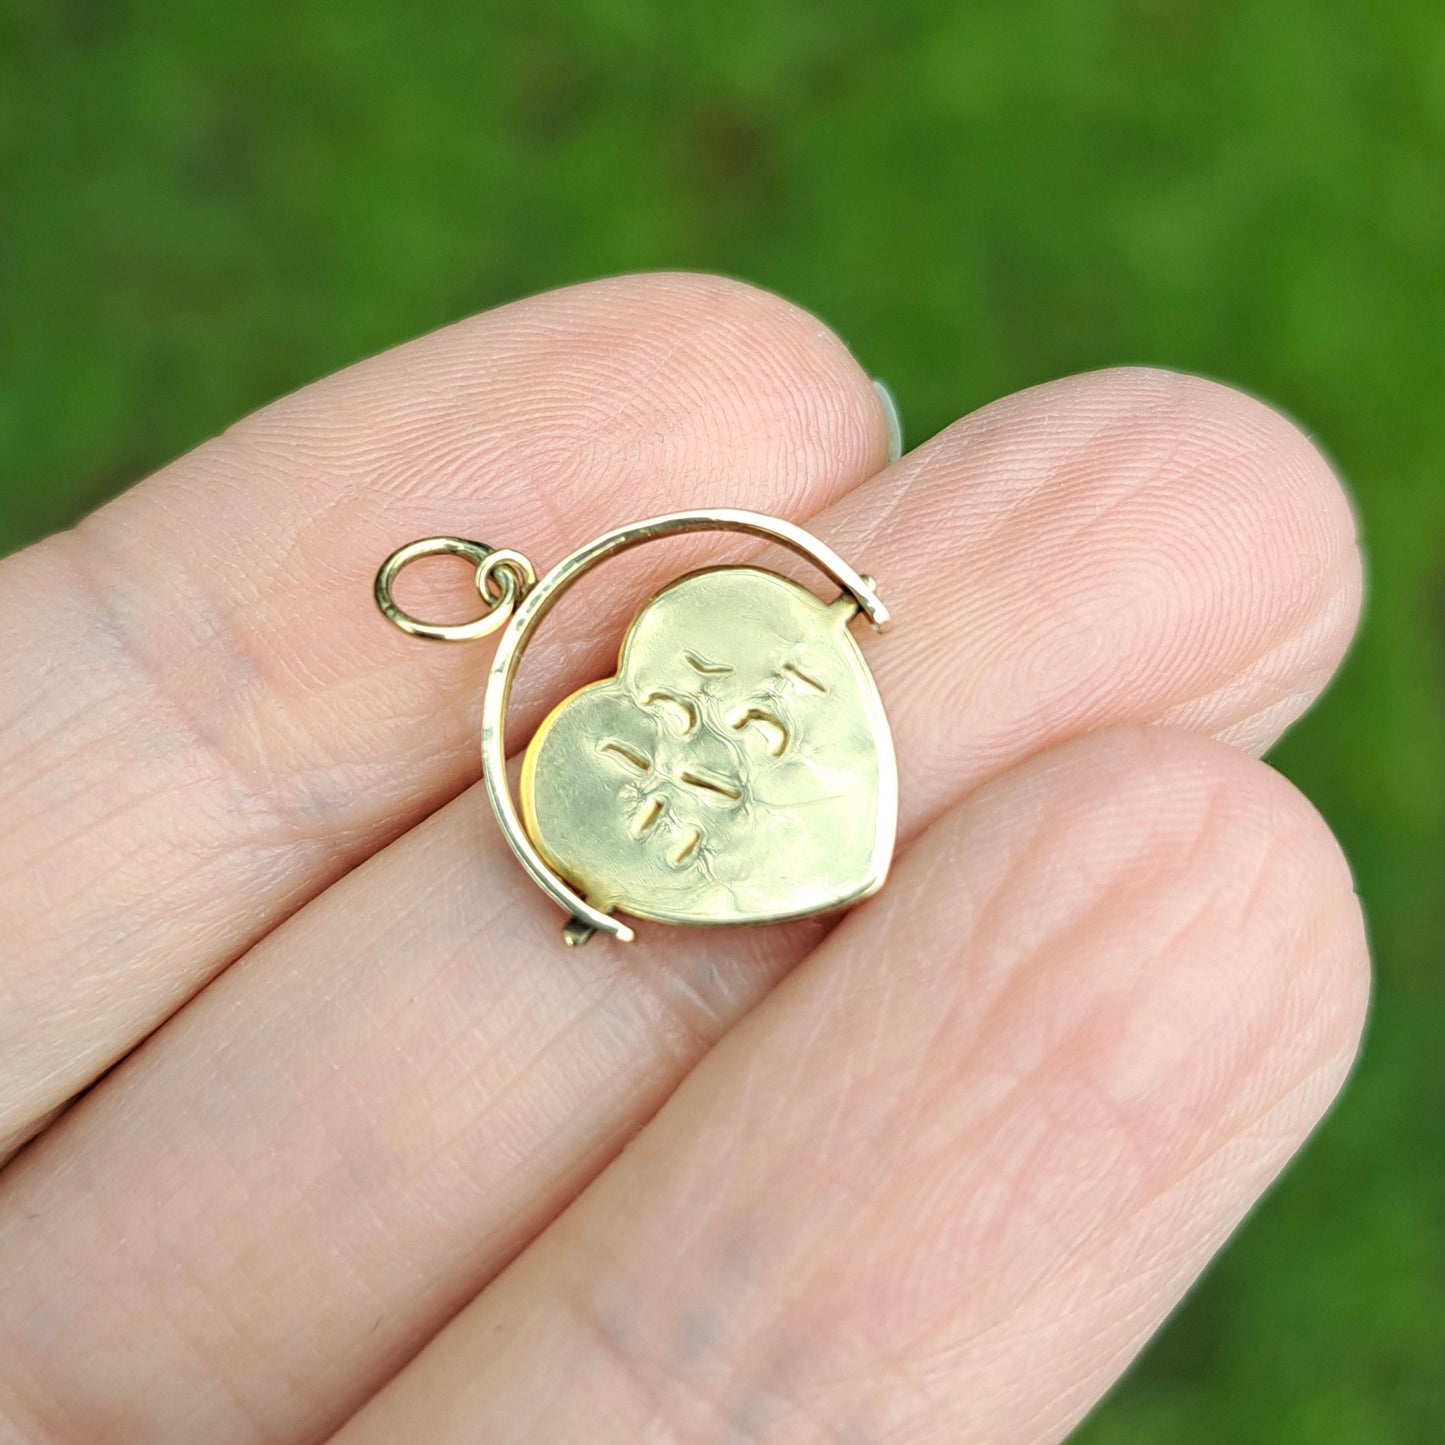 Vintage 9ct Gold "I LOVE YOU" Heart Spinner Charm, 1984